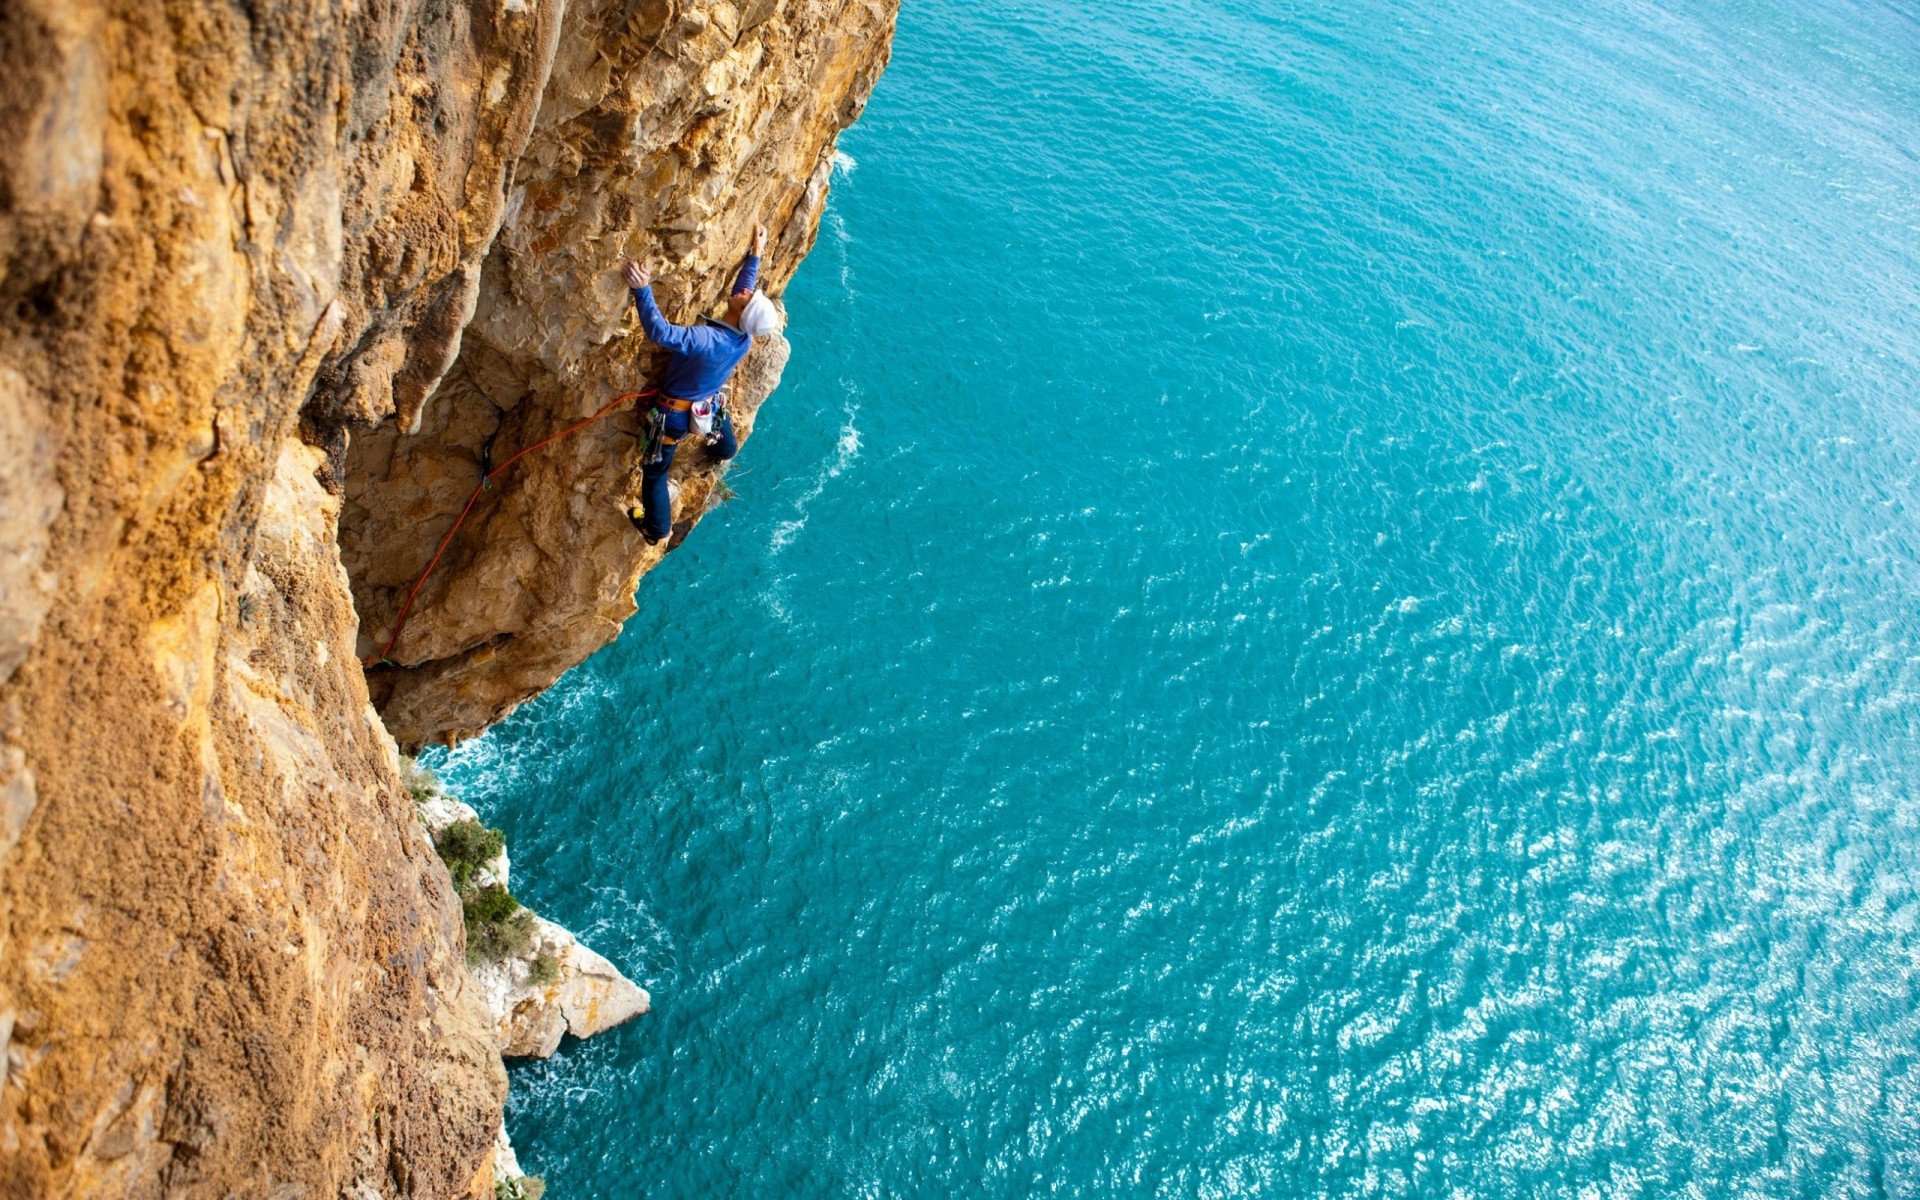 climbing water travel recreation sea summer ocean nature turquoise tropical vacation leisure seashore beach swimming outdoors island landscape climber background